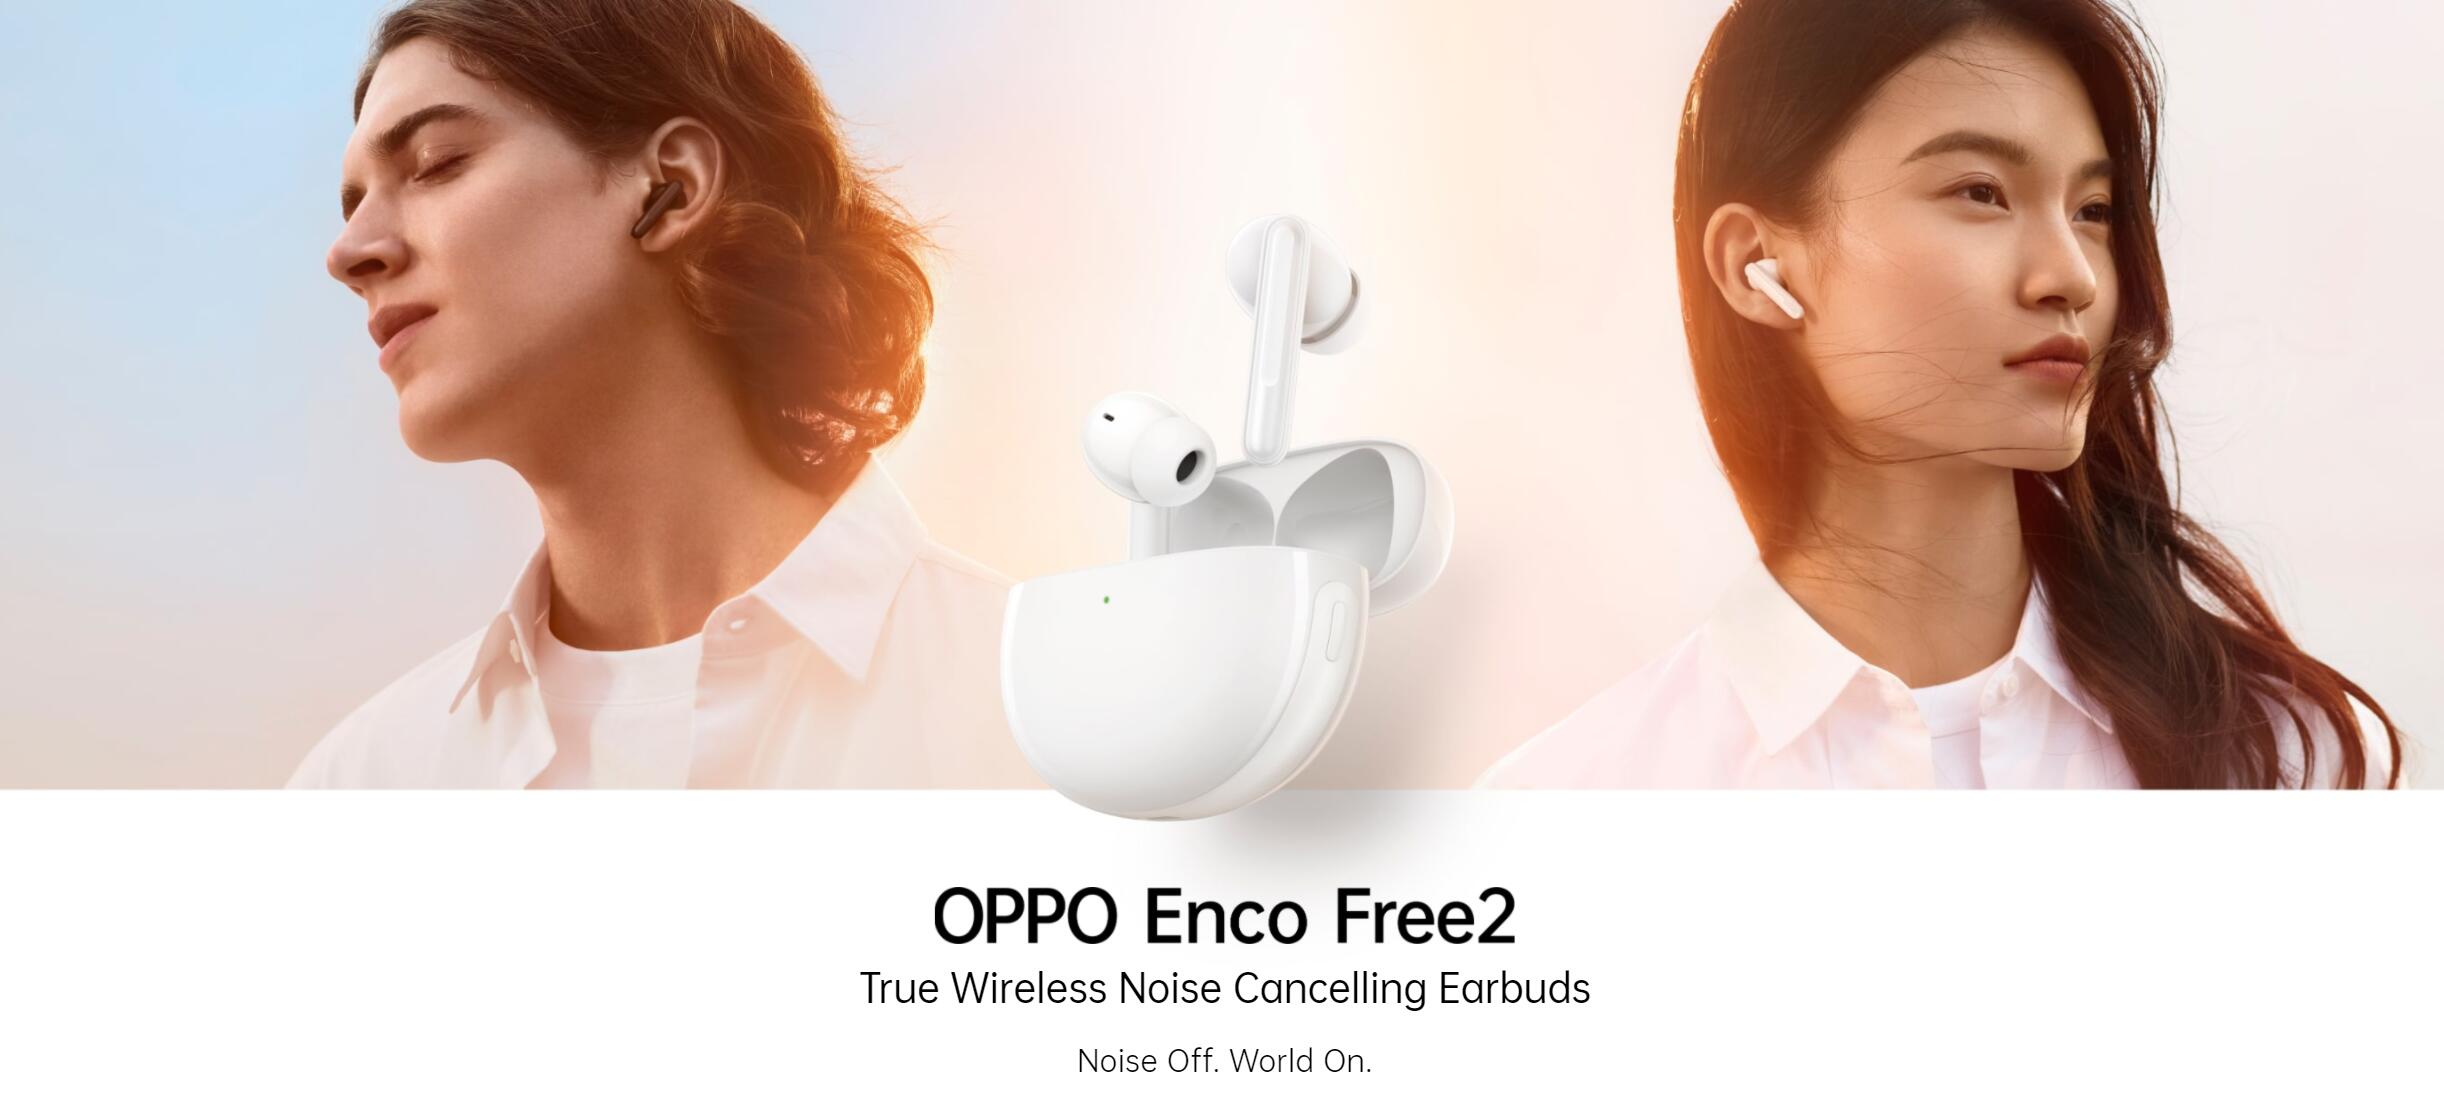 OPPO-Enco-Free-2-TWS-Earbuds-bluetooth-52-Earphone-ANC-Active-Noise-Cancellation-Low-Delay-IPX54-Spo-1877003-1